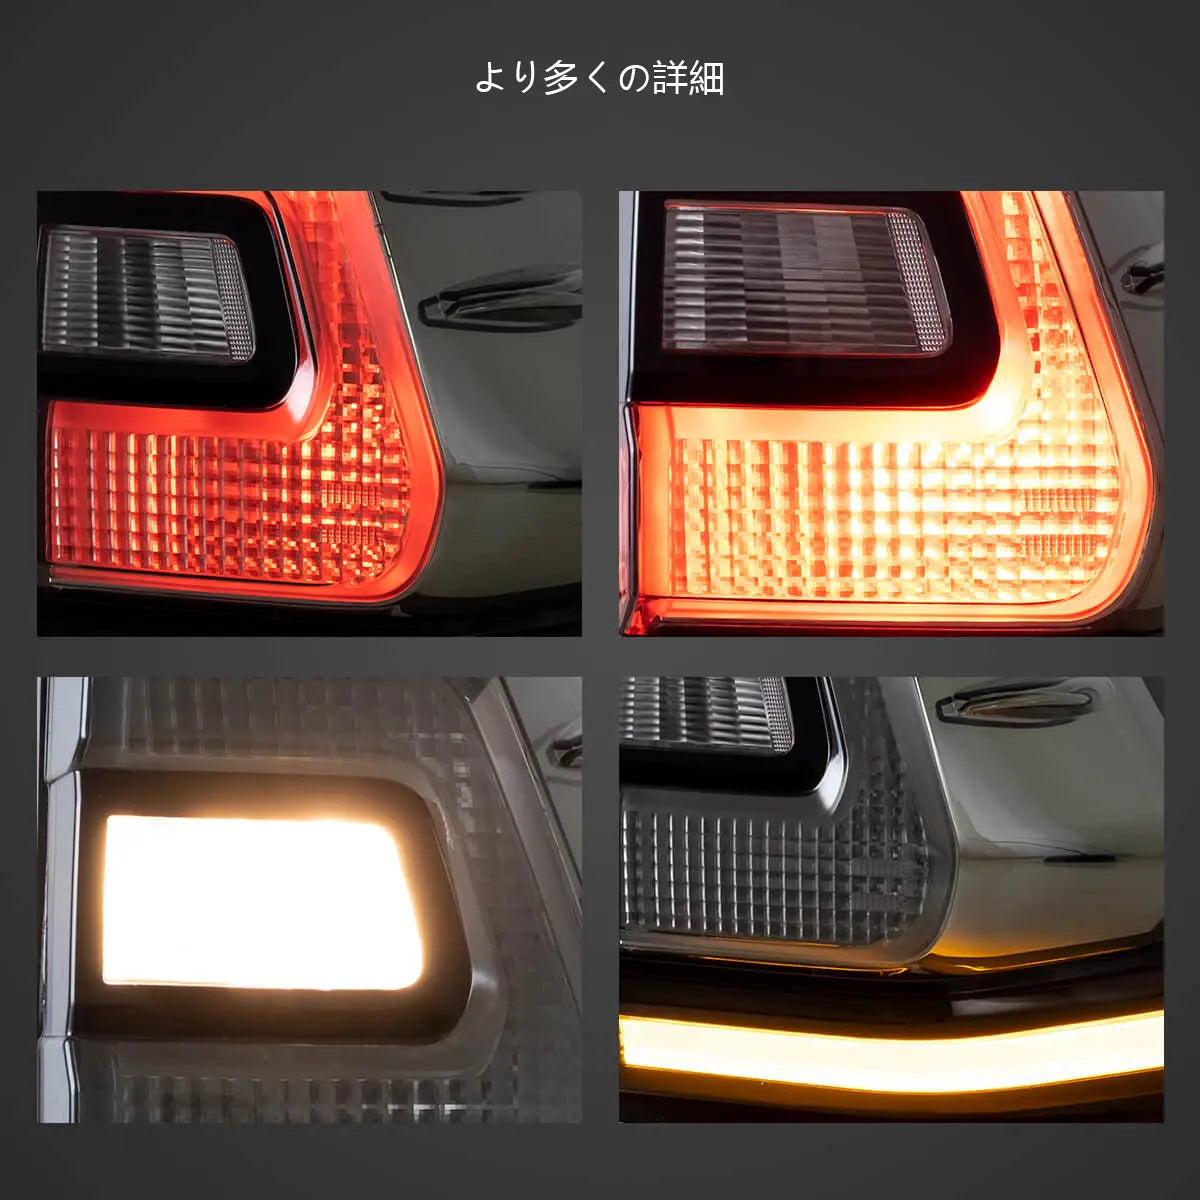 10-16 Toyota Land Cruiser Prado 4th Gen Vland LED Tail Light with Sequential Turn Signal Red